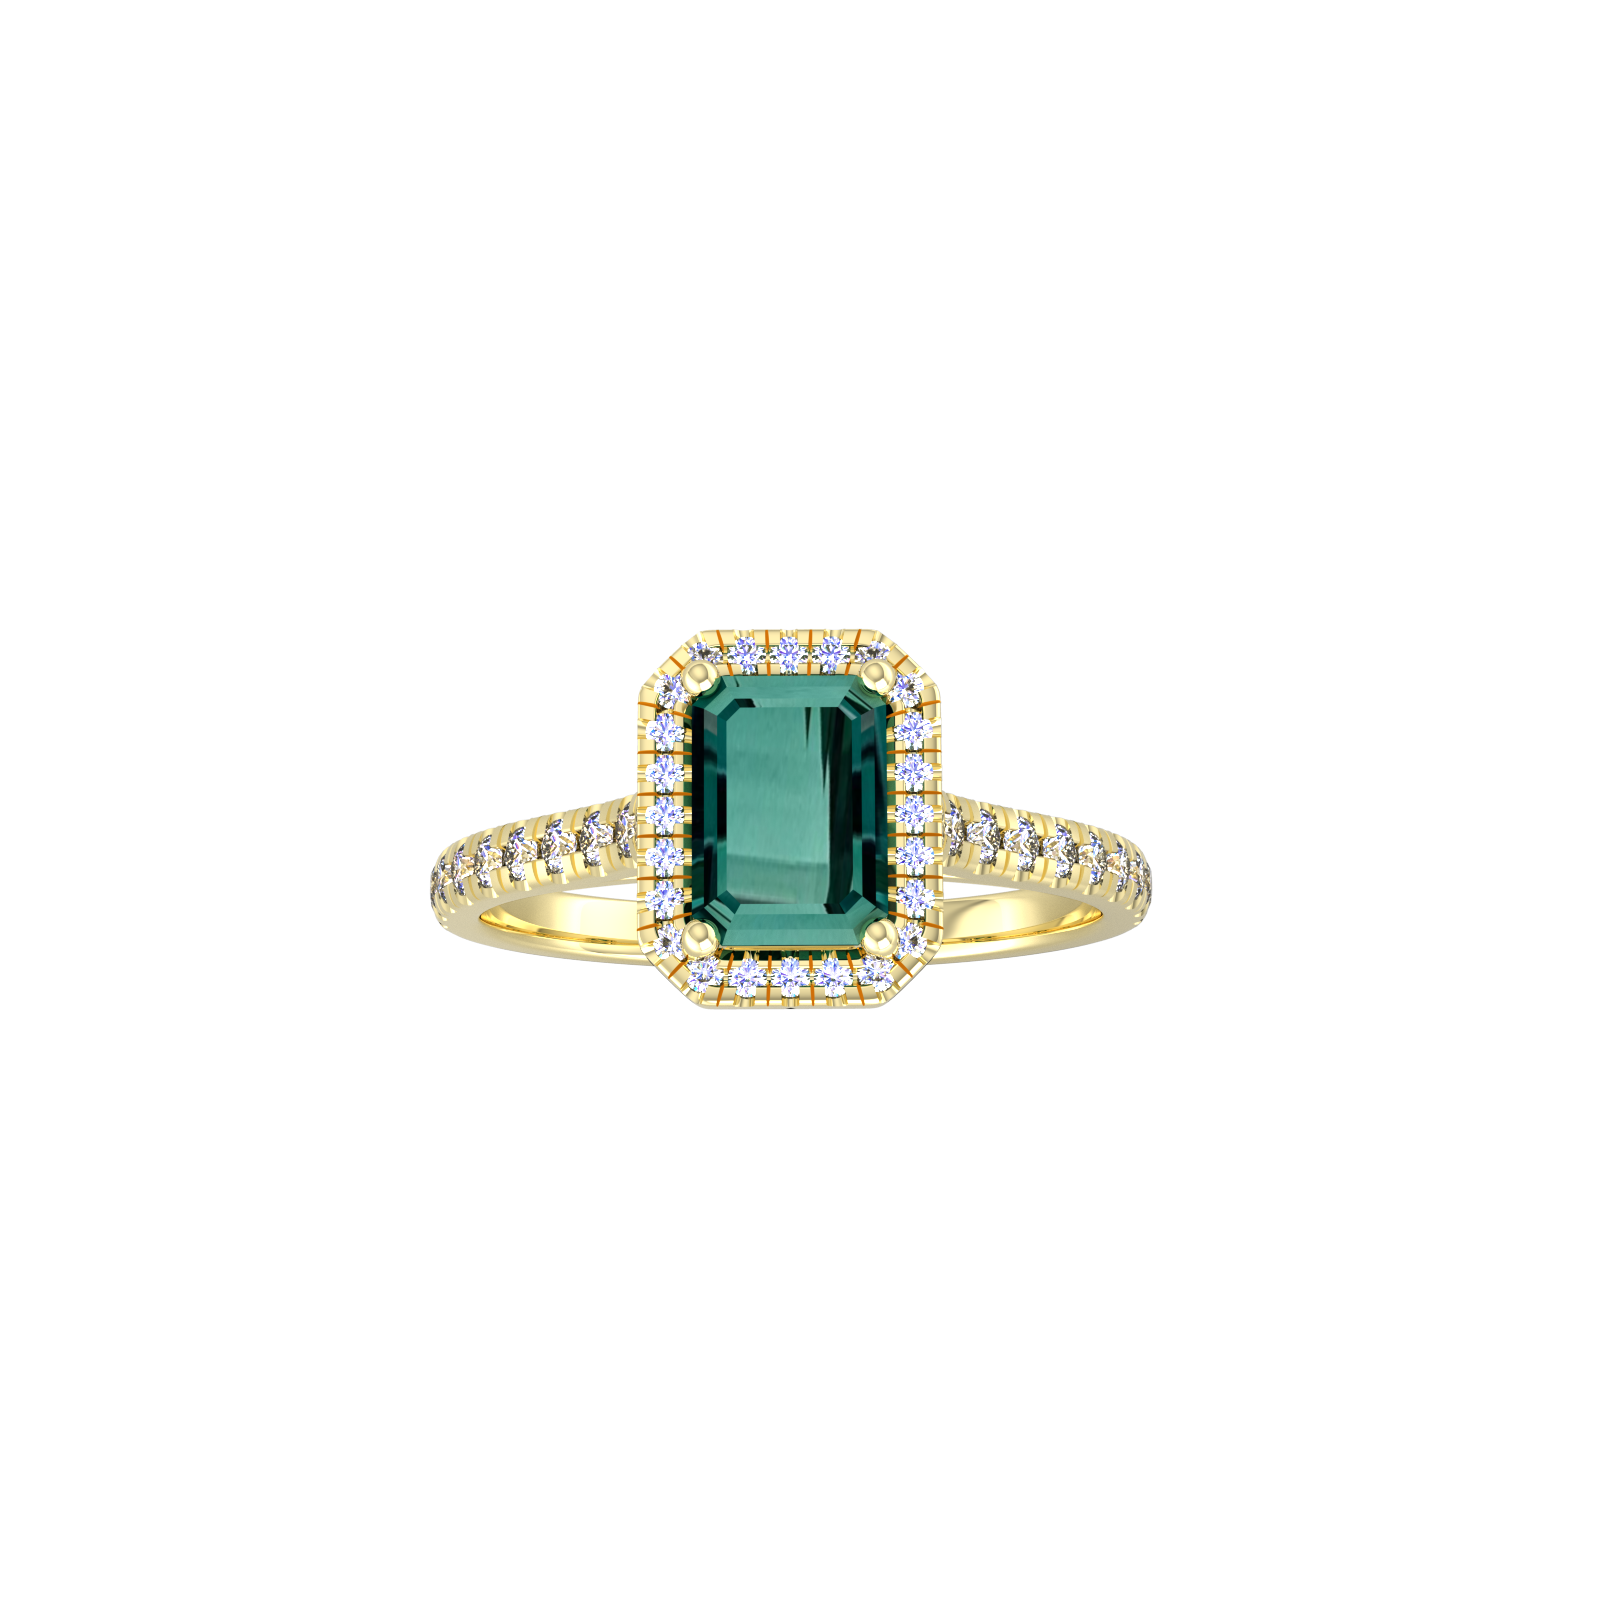 9ct Yellow Gold Green Tourmaline & Diamond Halo Ring with Diamond Shoulders - Ring Size Q